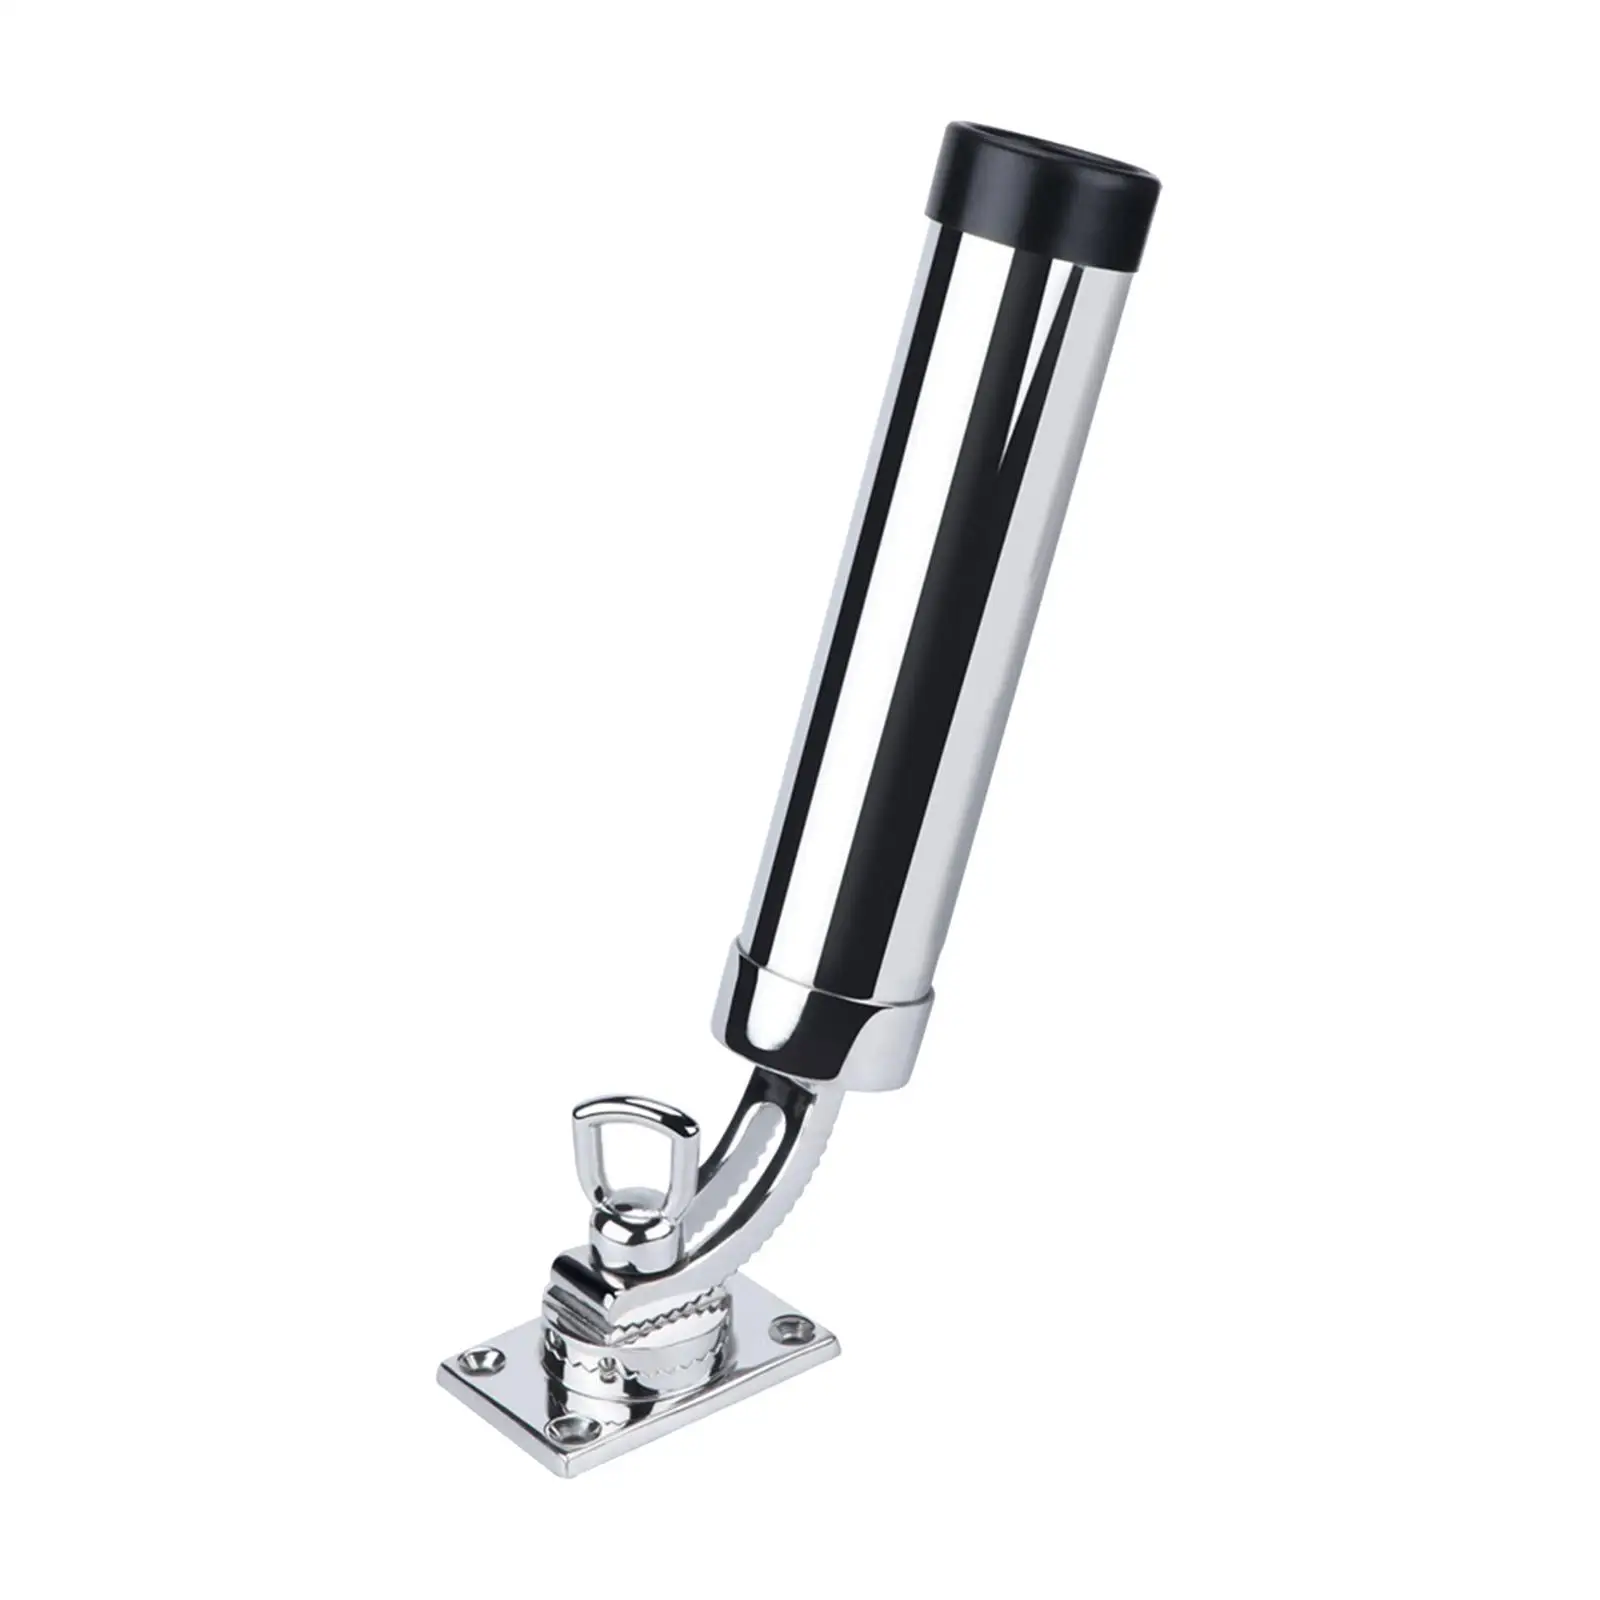 Stainless Steel Fishing Rod Holder Bracket Supporting Accessories Rail Mounting Premium Fishing Pole Holder Rail Mounted Clamp